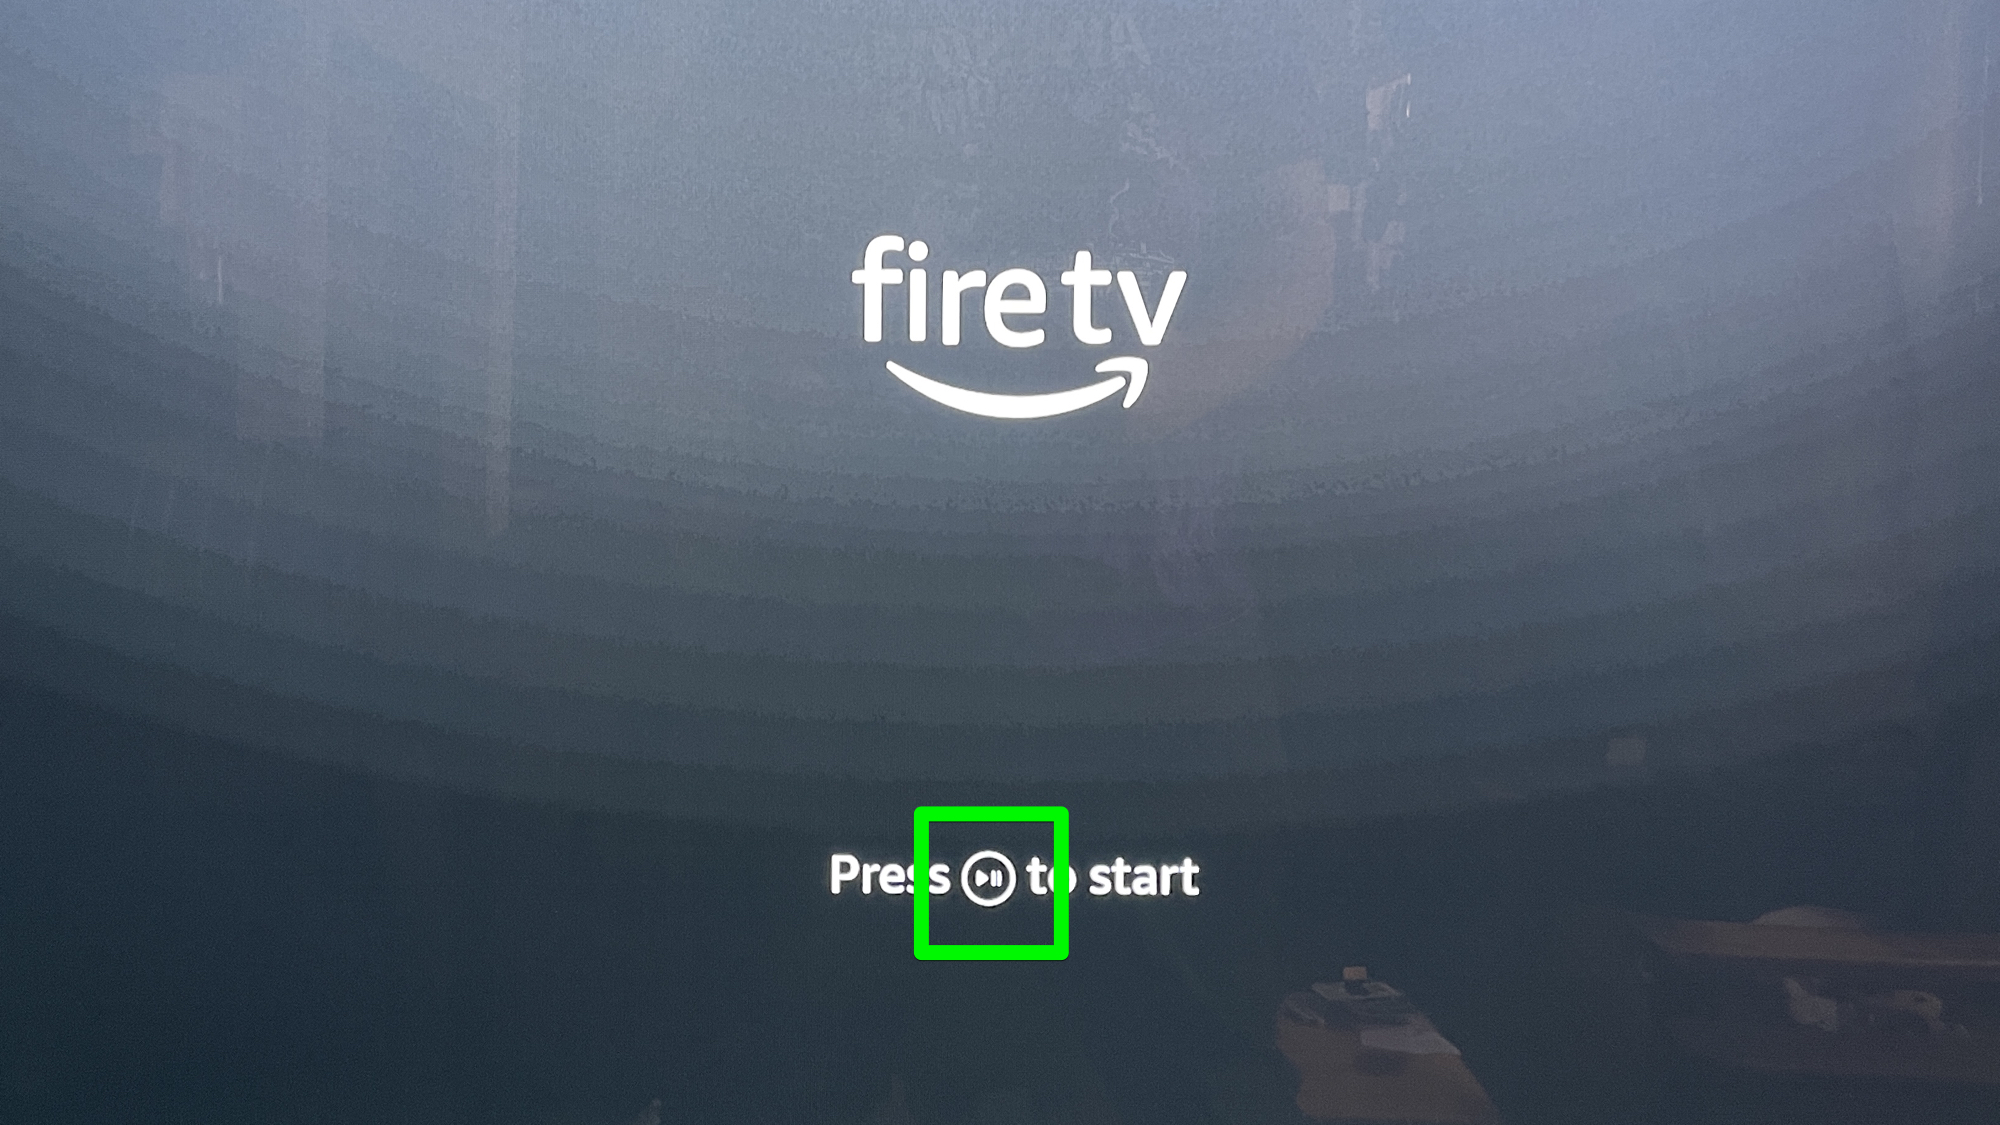 the fire tv setup screen asking to press play/pause